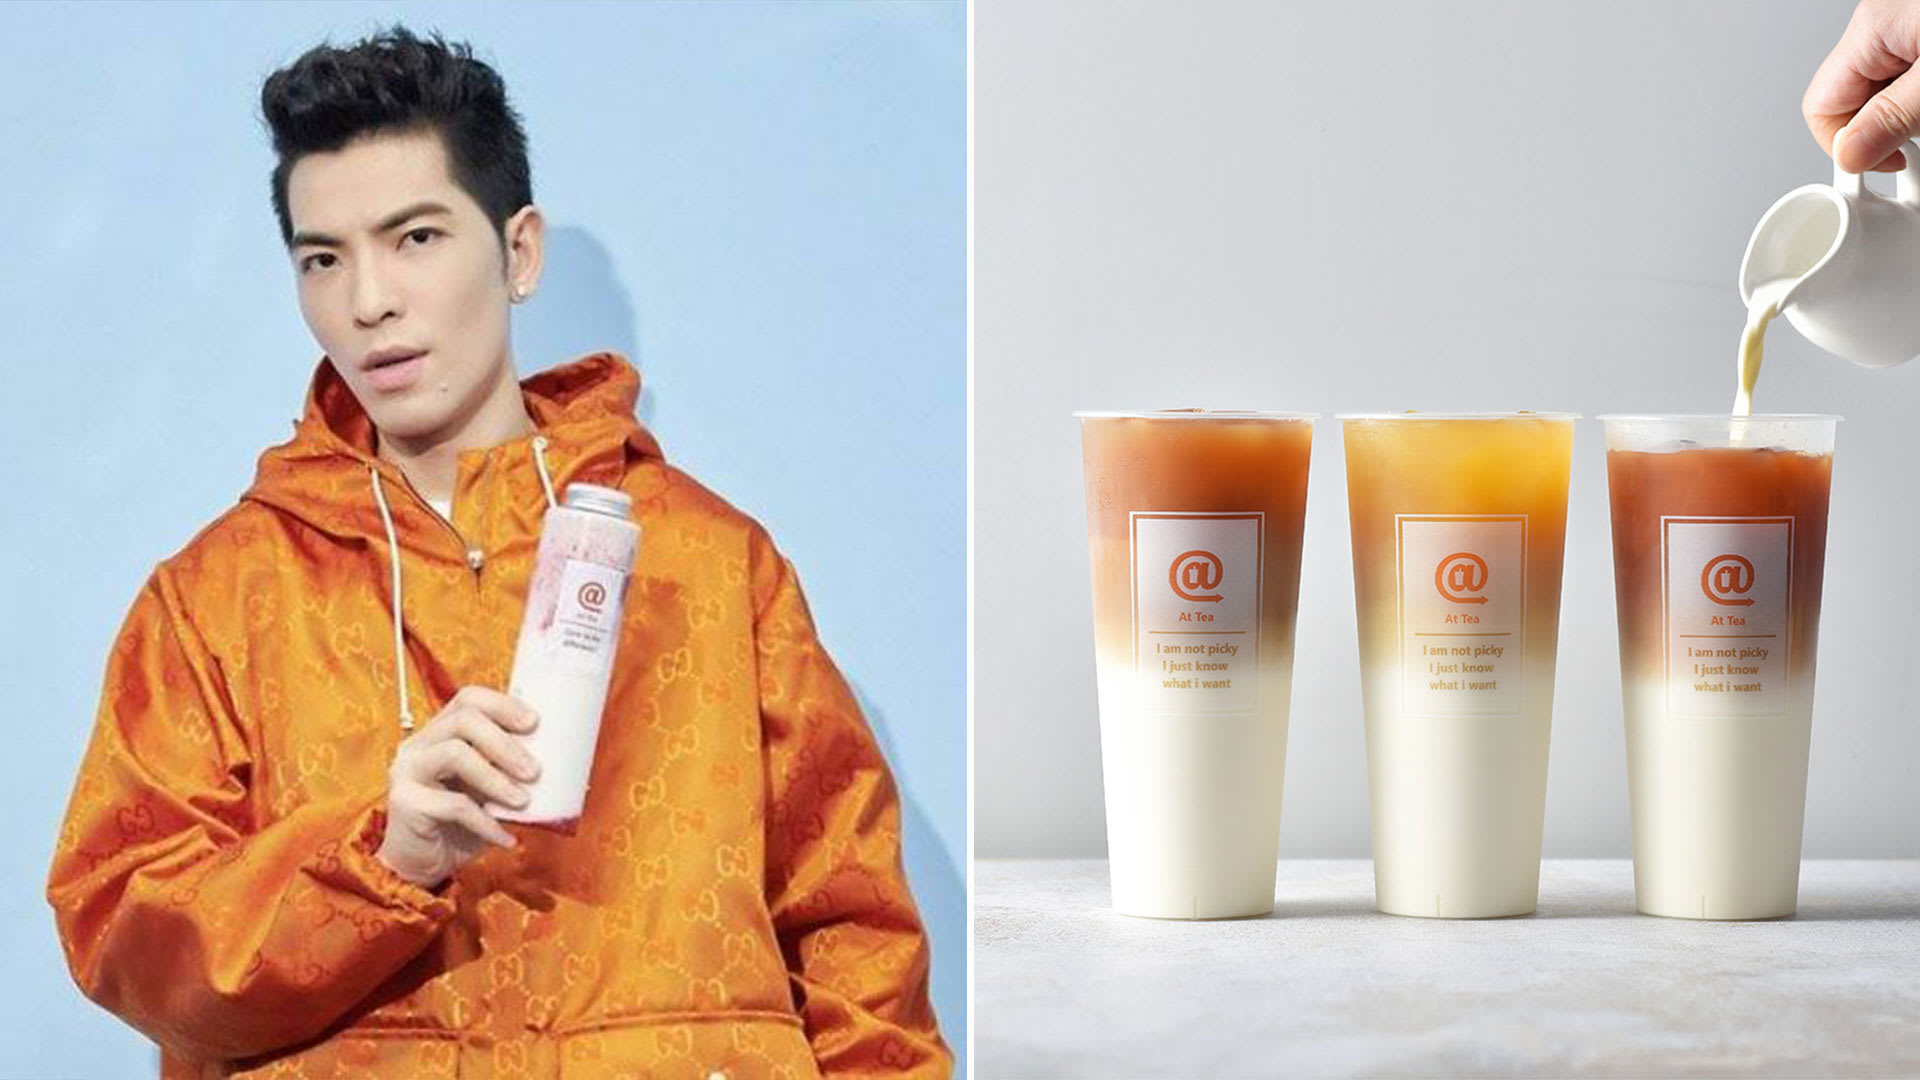 Jam Hsiao’s Bubble Tea Shop @AtTea Opening First S’pore Outlet